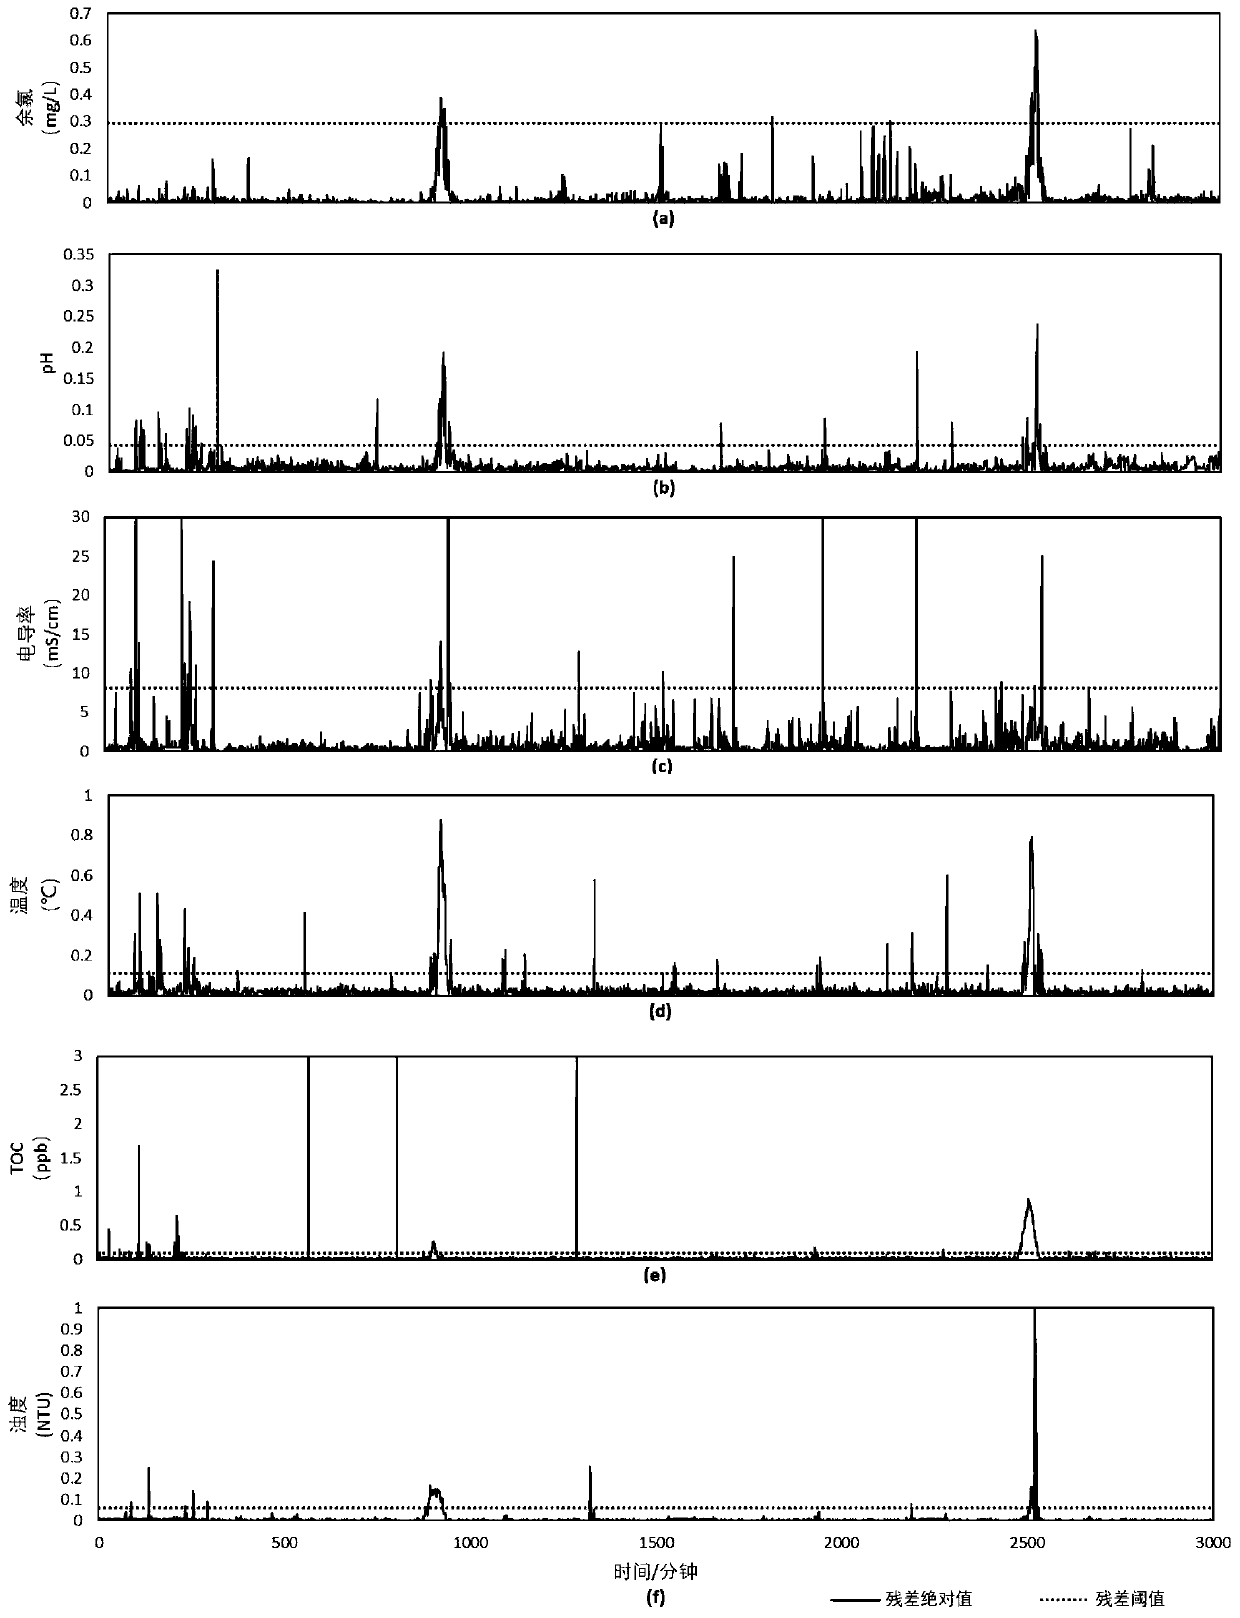 Water quality abnormal event identification and early warning method based on pipe network multivariate water quality time series data